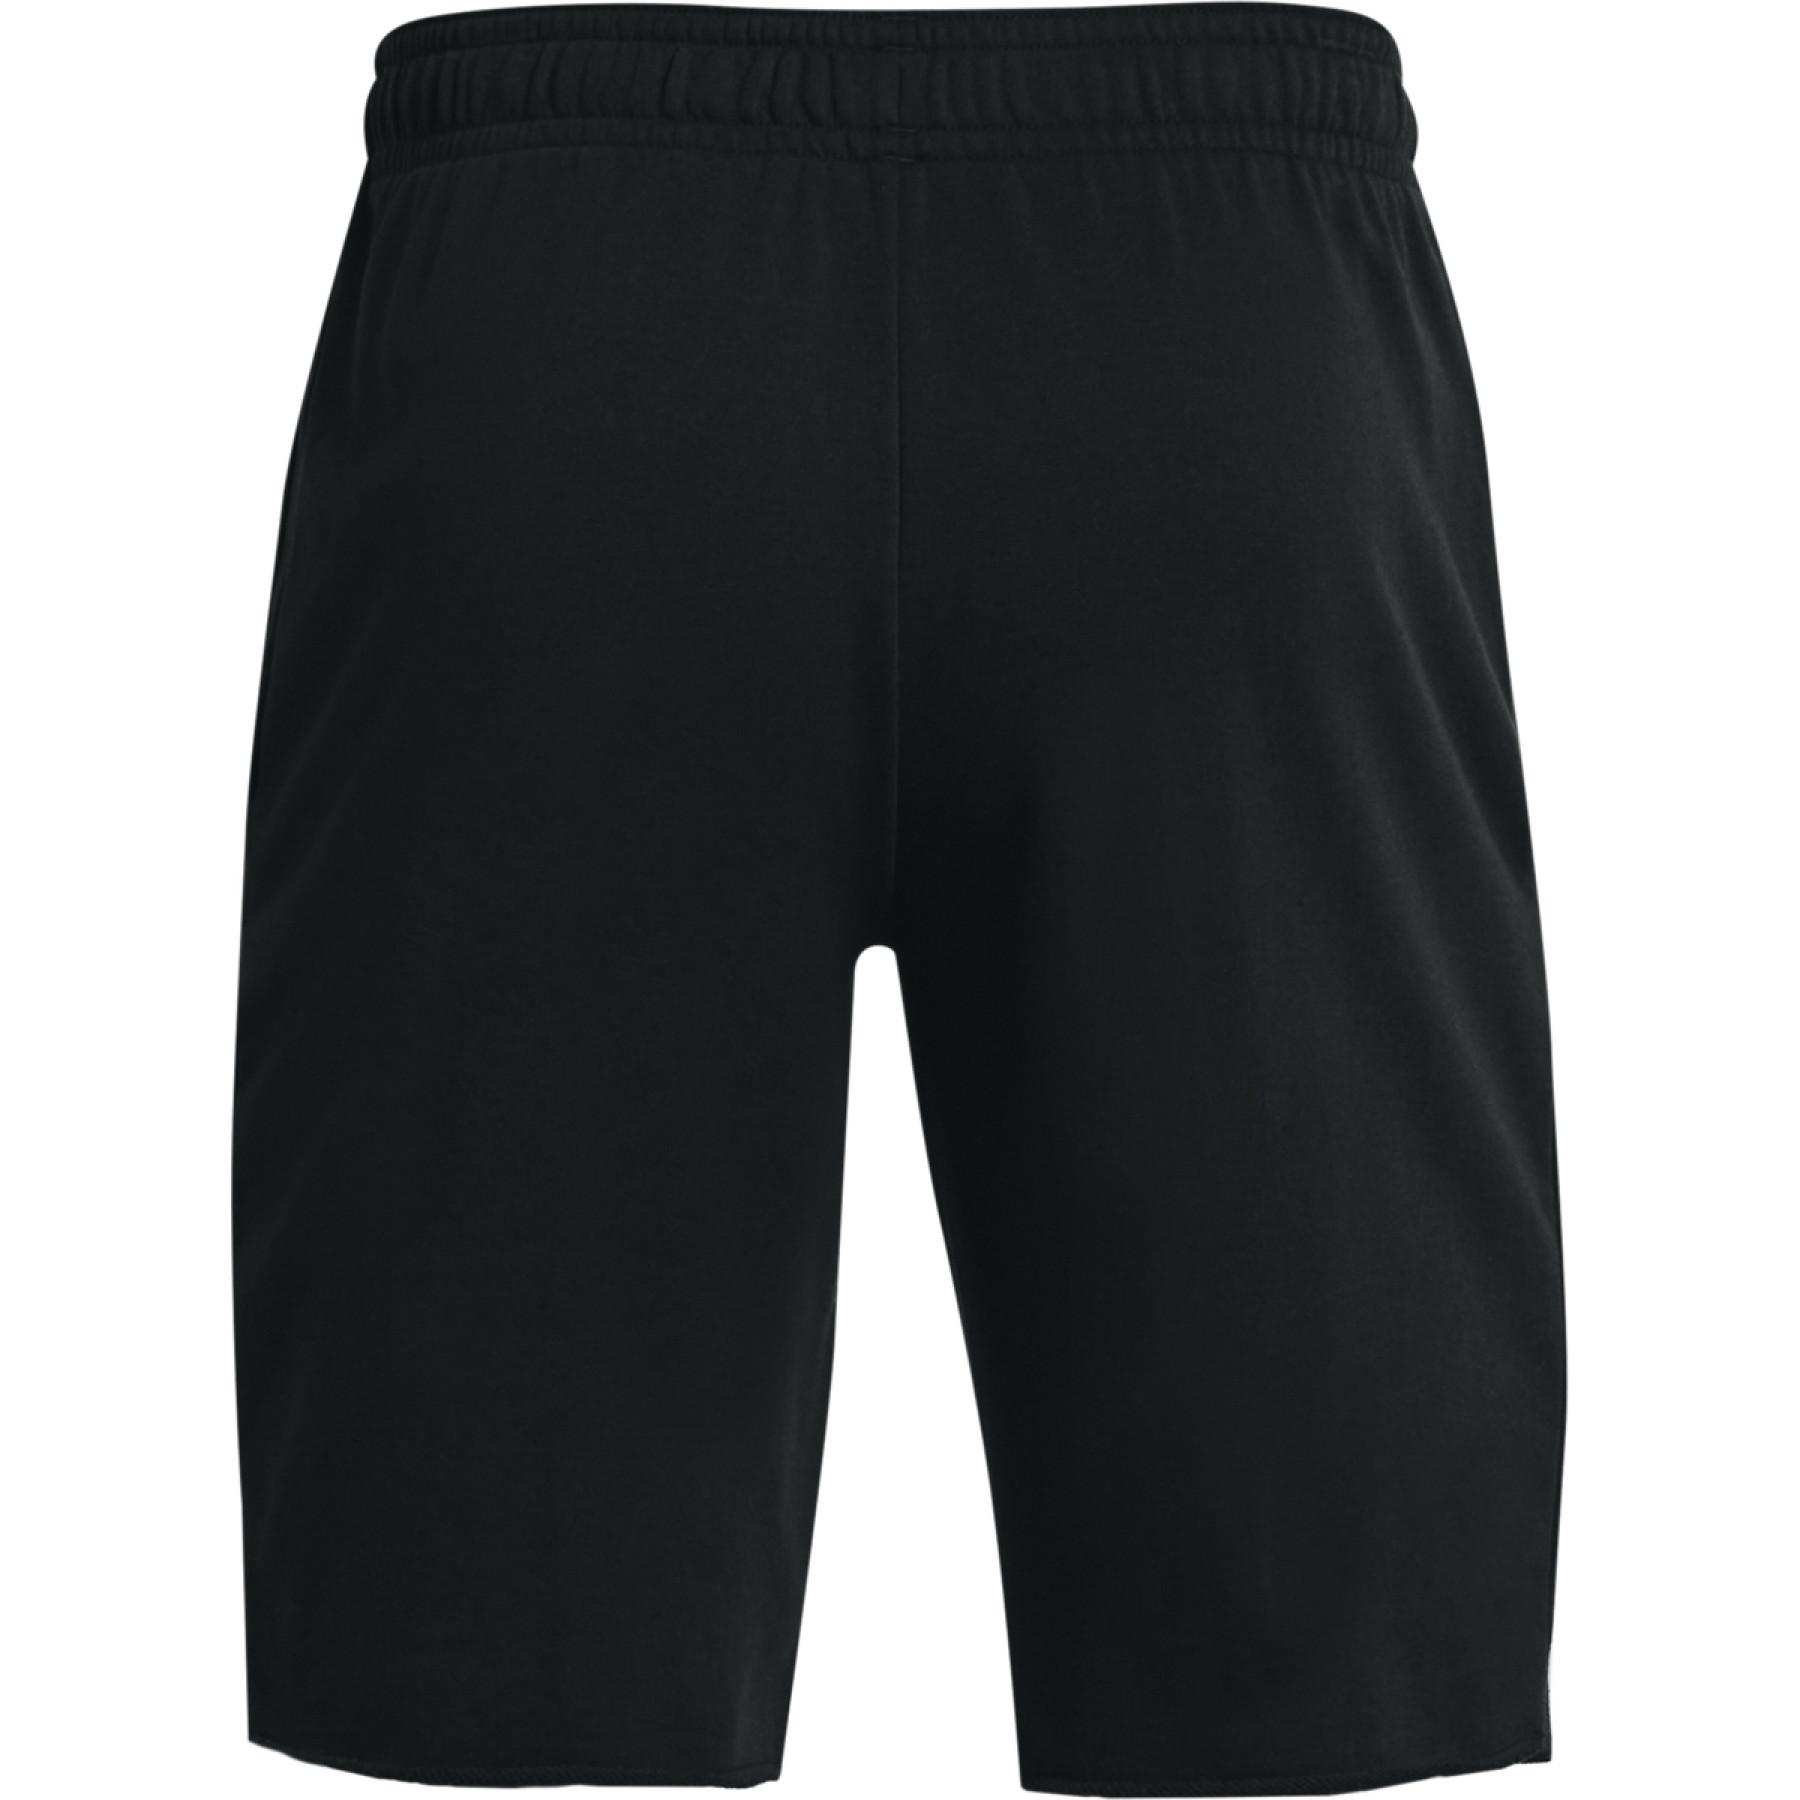 Shorts Under Armour Rival Terry